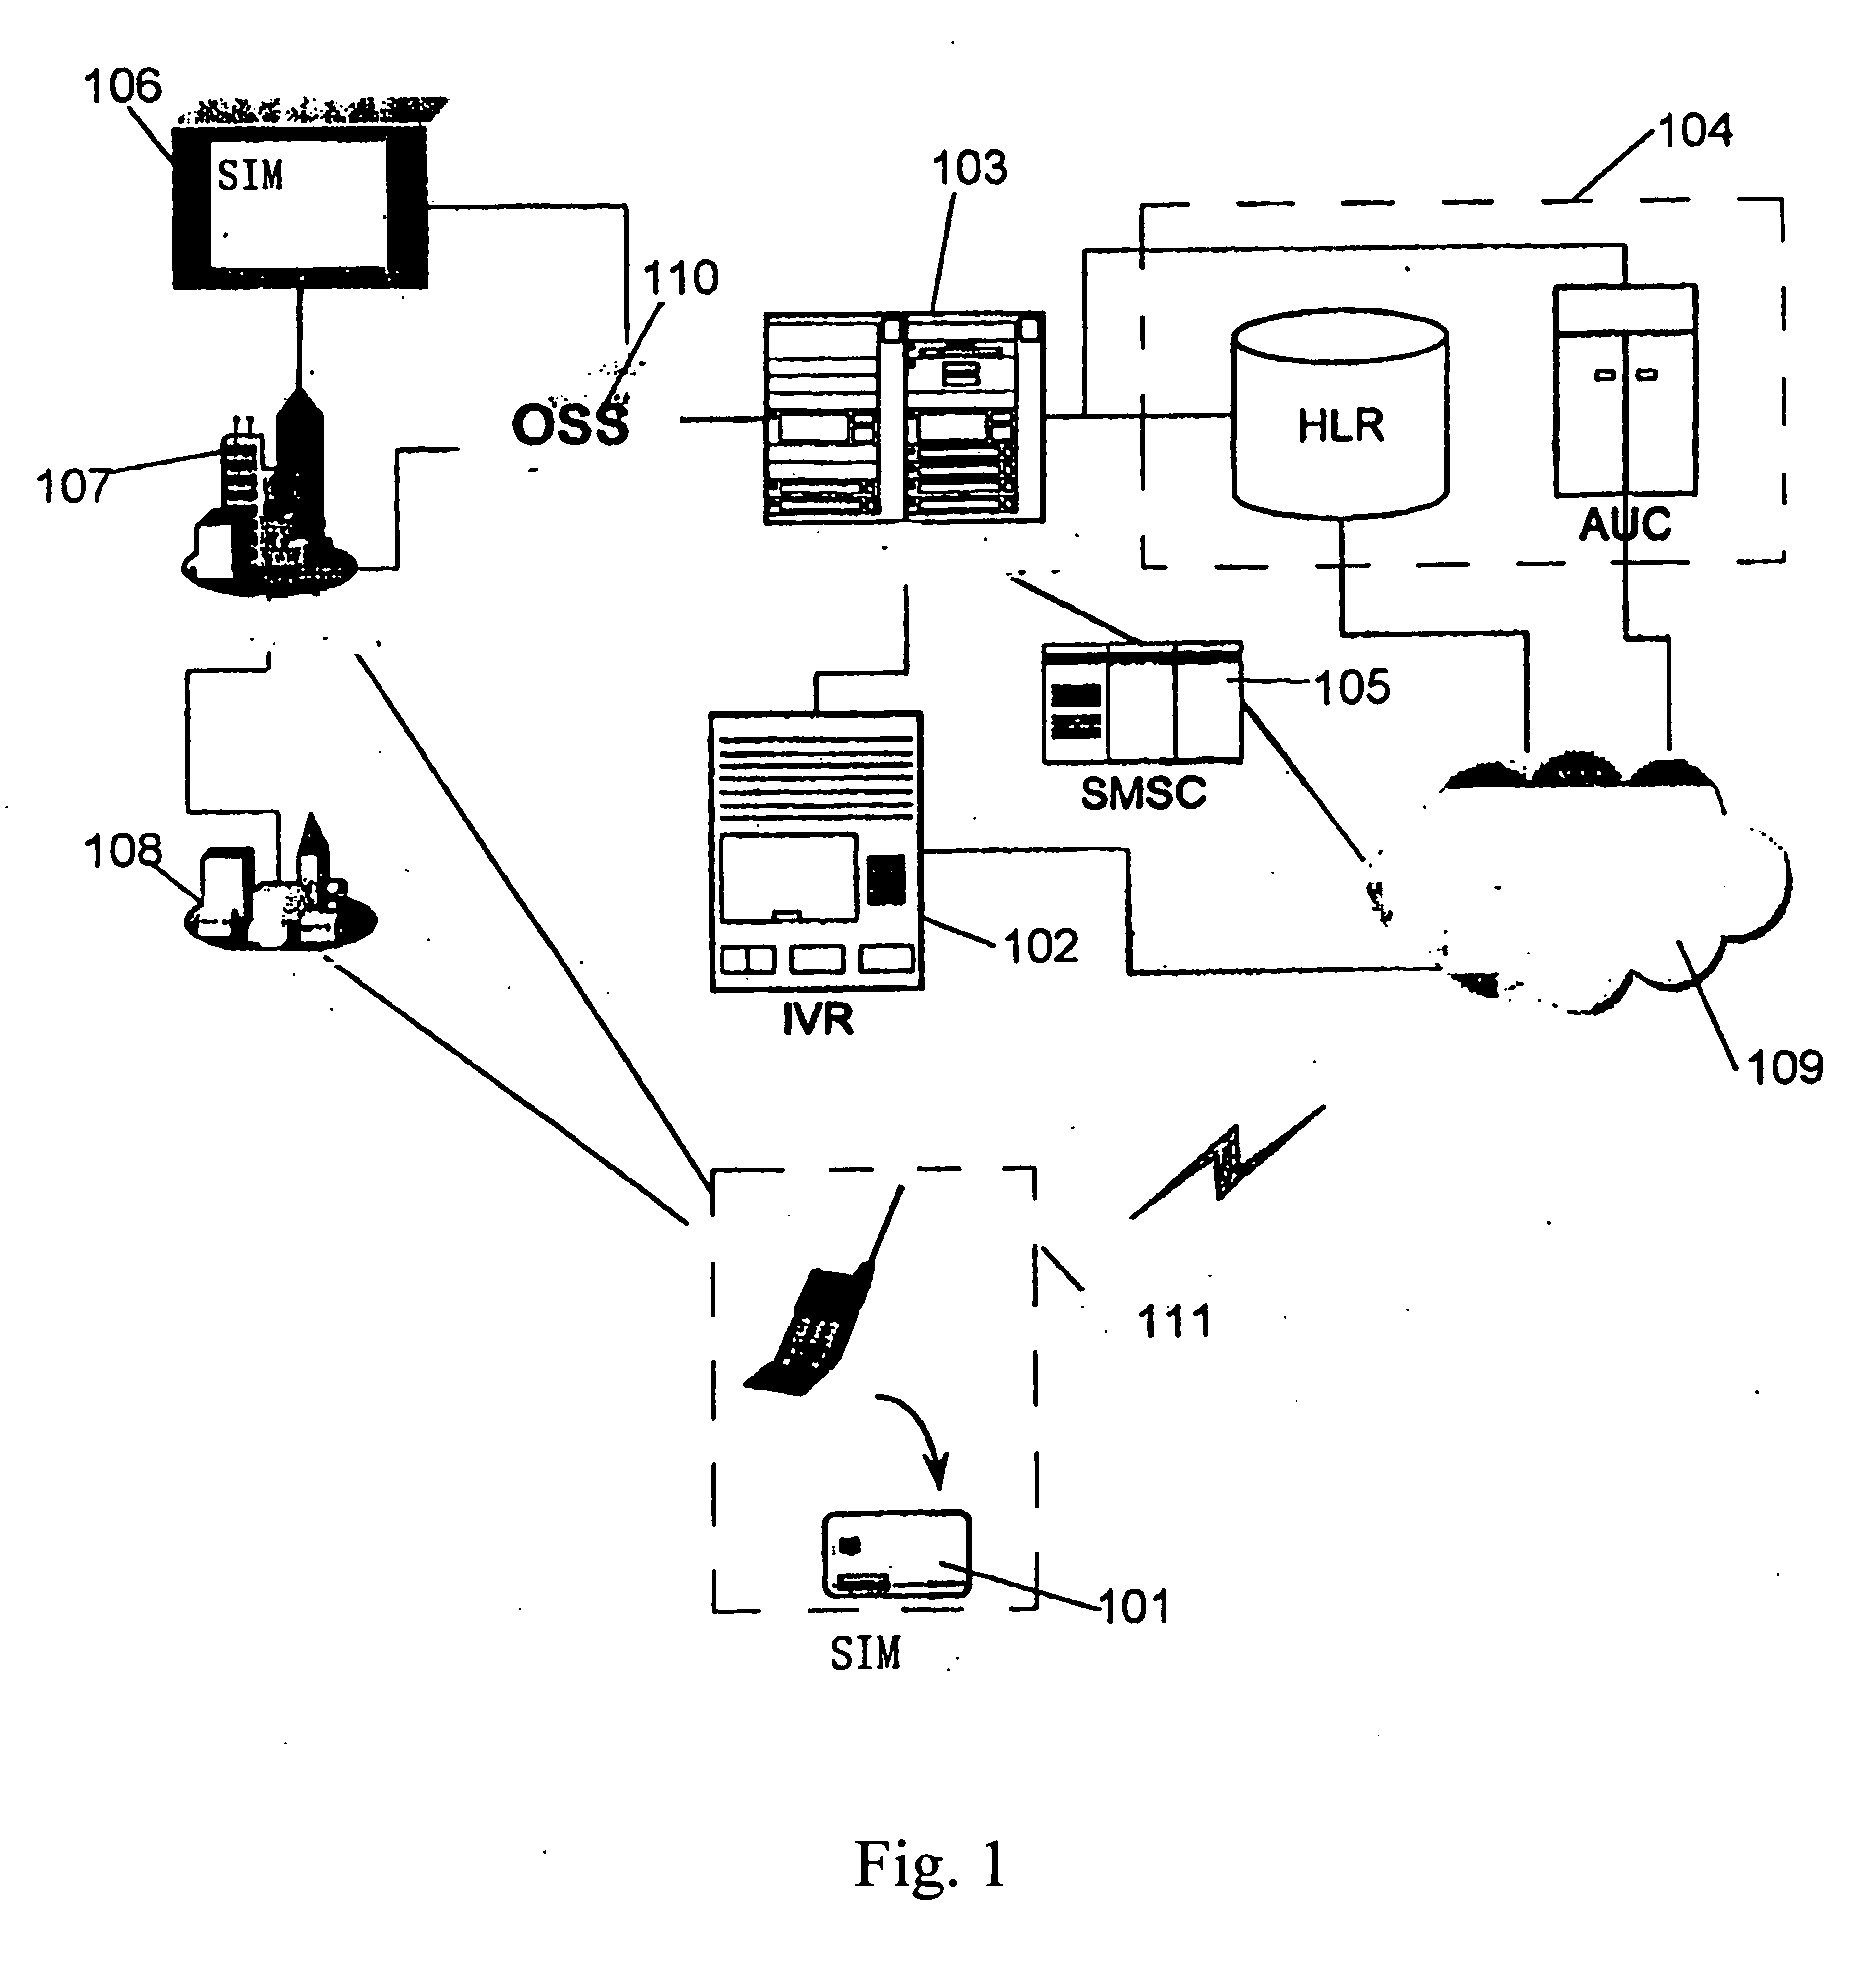 Activating an identity module for a communication system